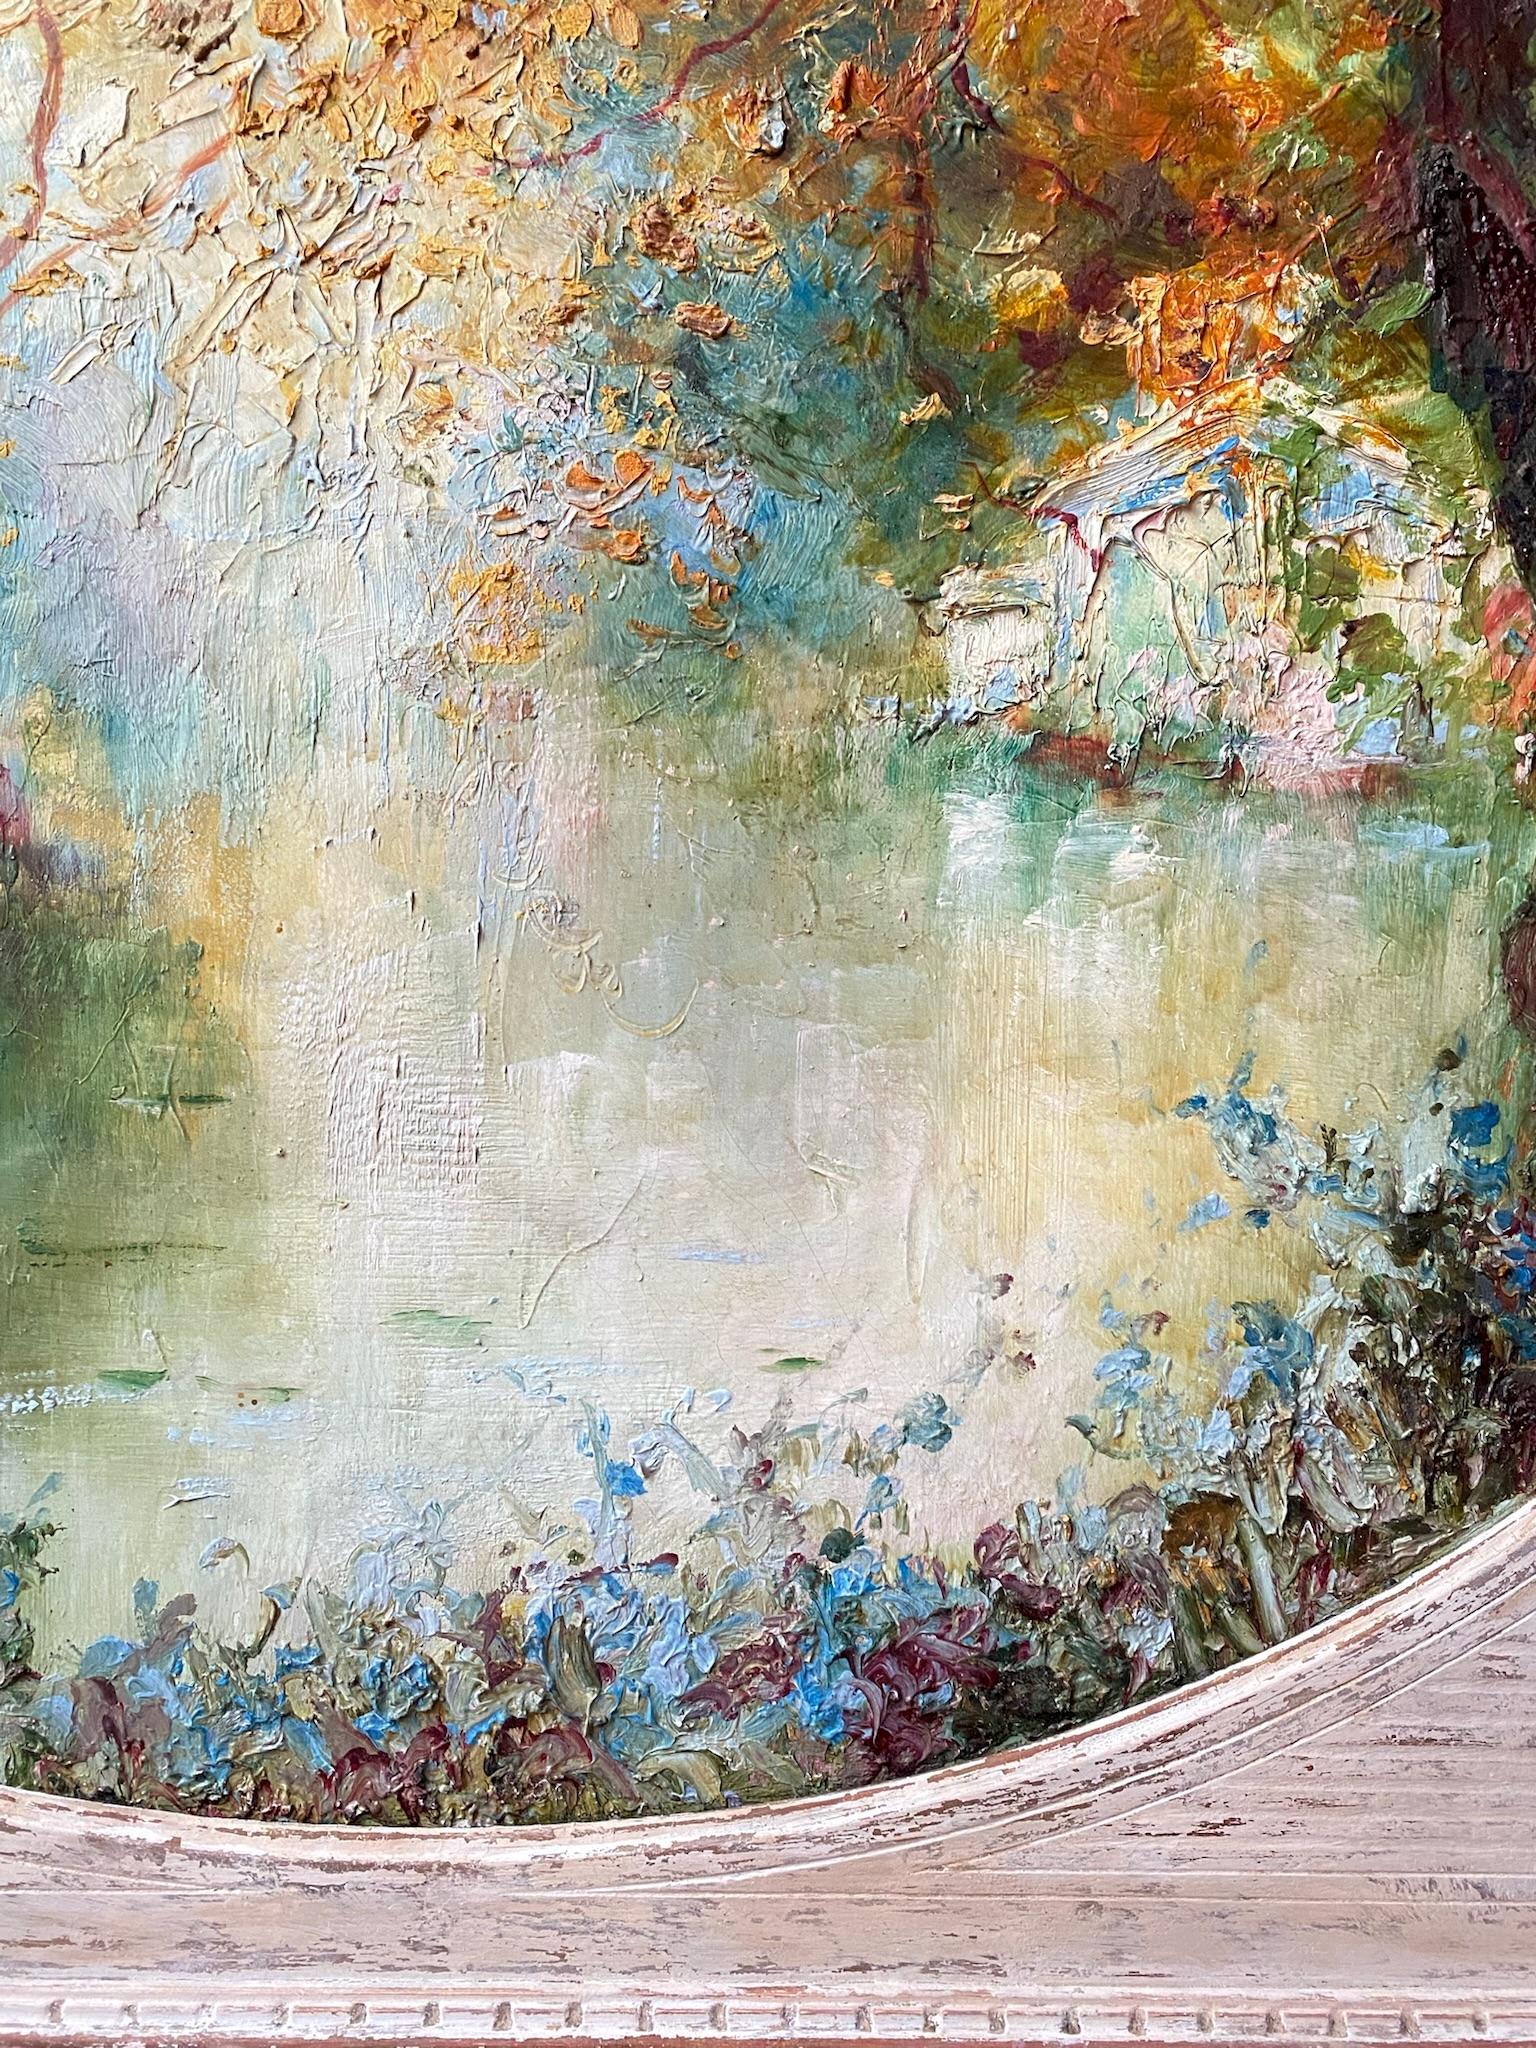 Light on the water large colorful Impressionist landscape with Monet-like irises - Post-Impressionist Painting by Italo Giordani